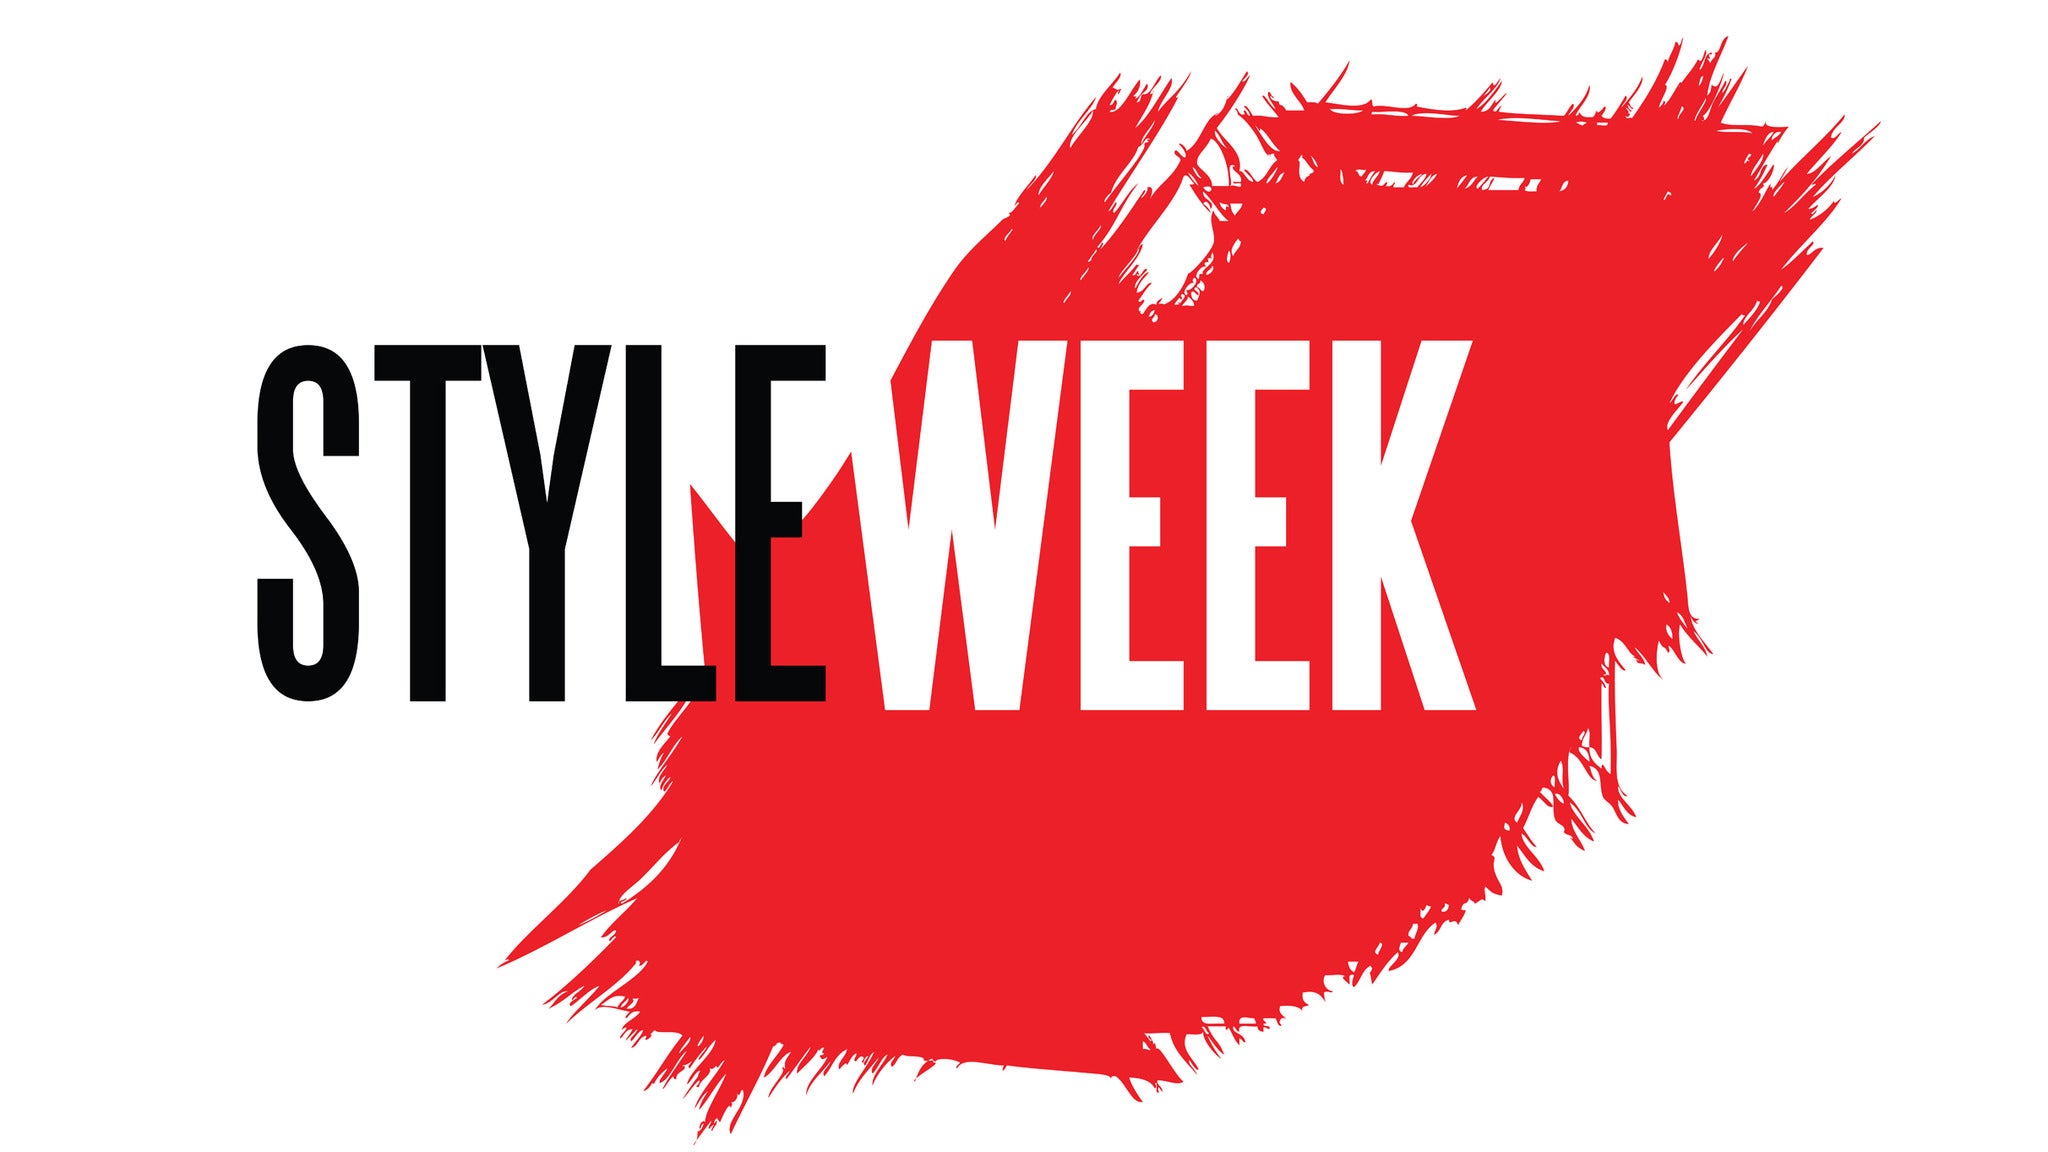 STYLEWEEK Northeast - Fashion Week in Providence promo photo for Ticketmaster presale offer code